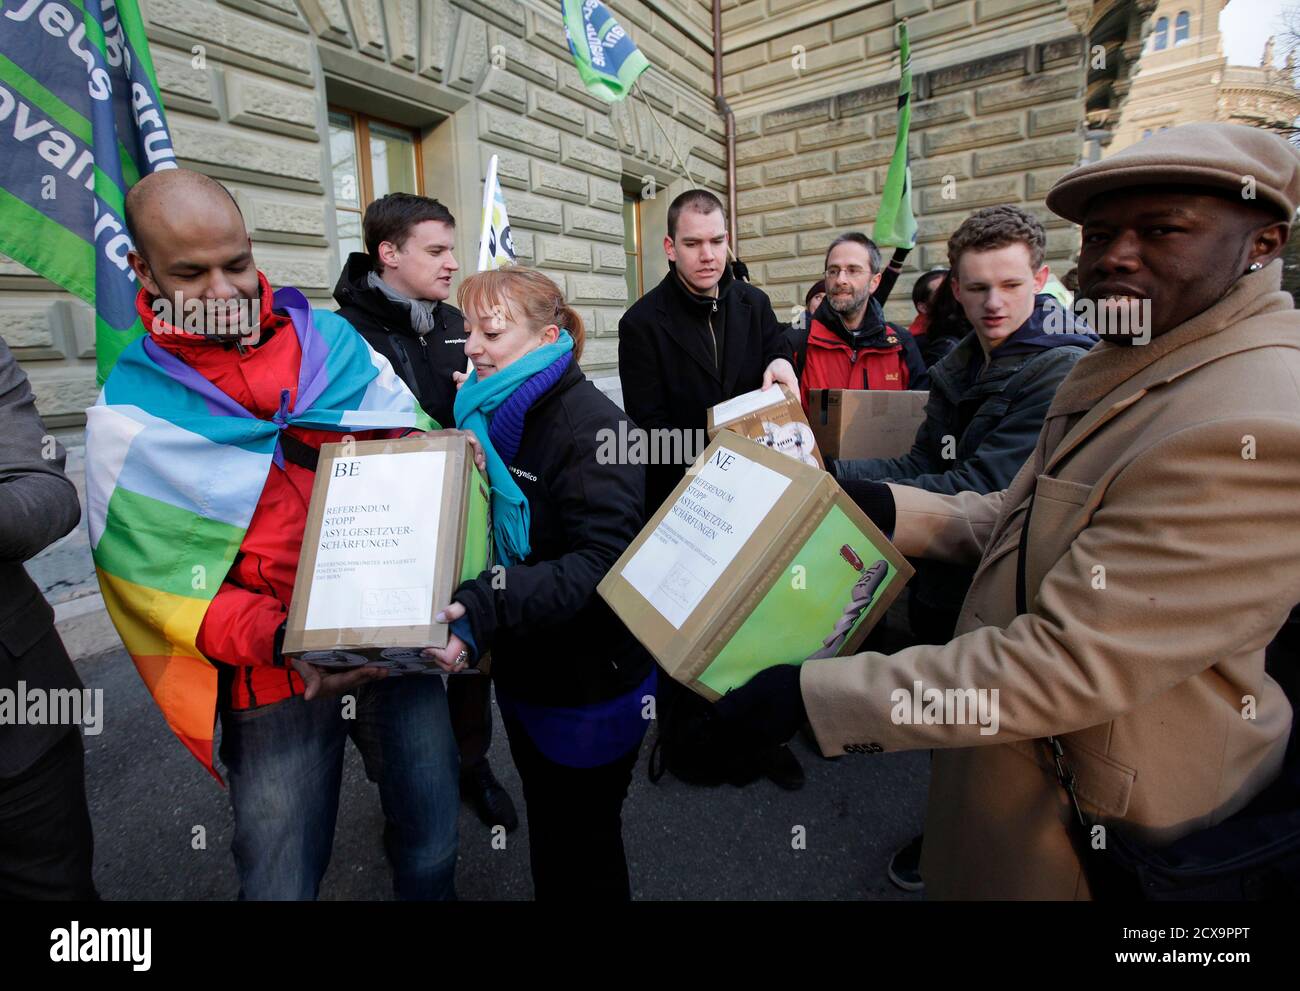 Members of the Referendum Committee and activists deliver boxes with 63,000 signatures to the chancellery in Bern January 17, 2013, for a referendum against the urgent measures of the asylum law revision (dringlichen Massnahmen der Asylgesetzrevision).   REUTERS/Denis Balibouse (SWITZERLAND - Tags: POLITICS) Stock Photo